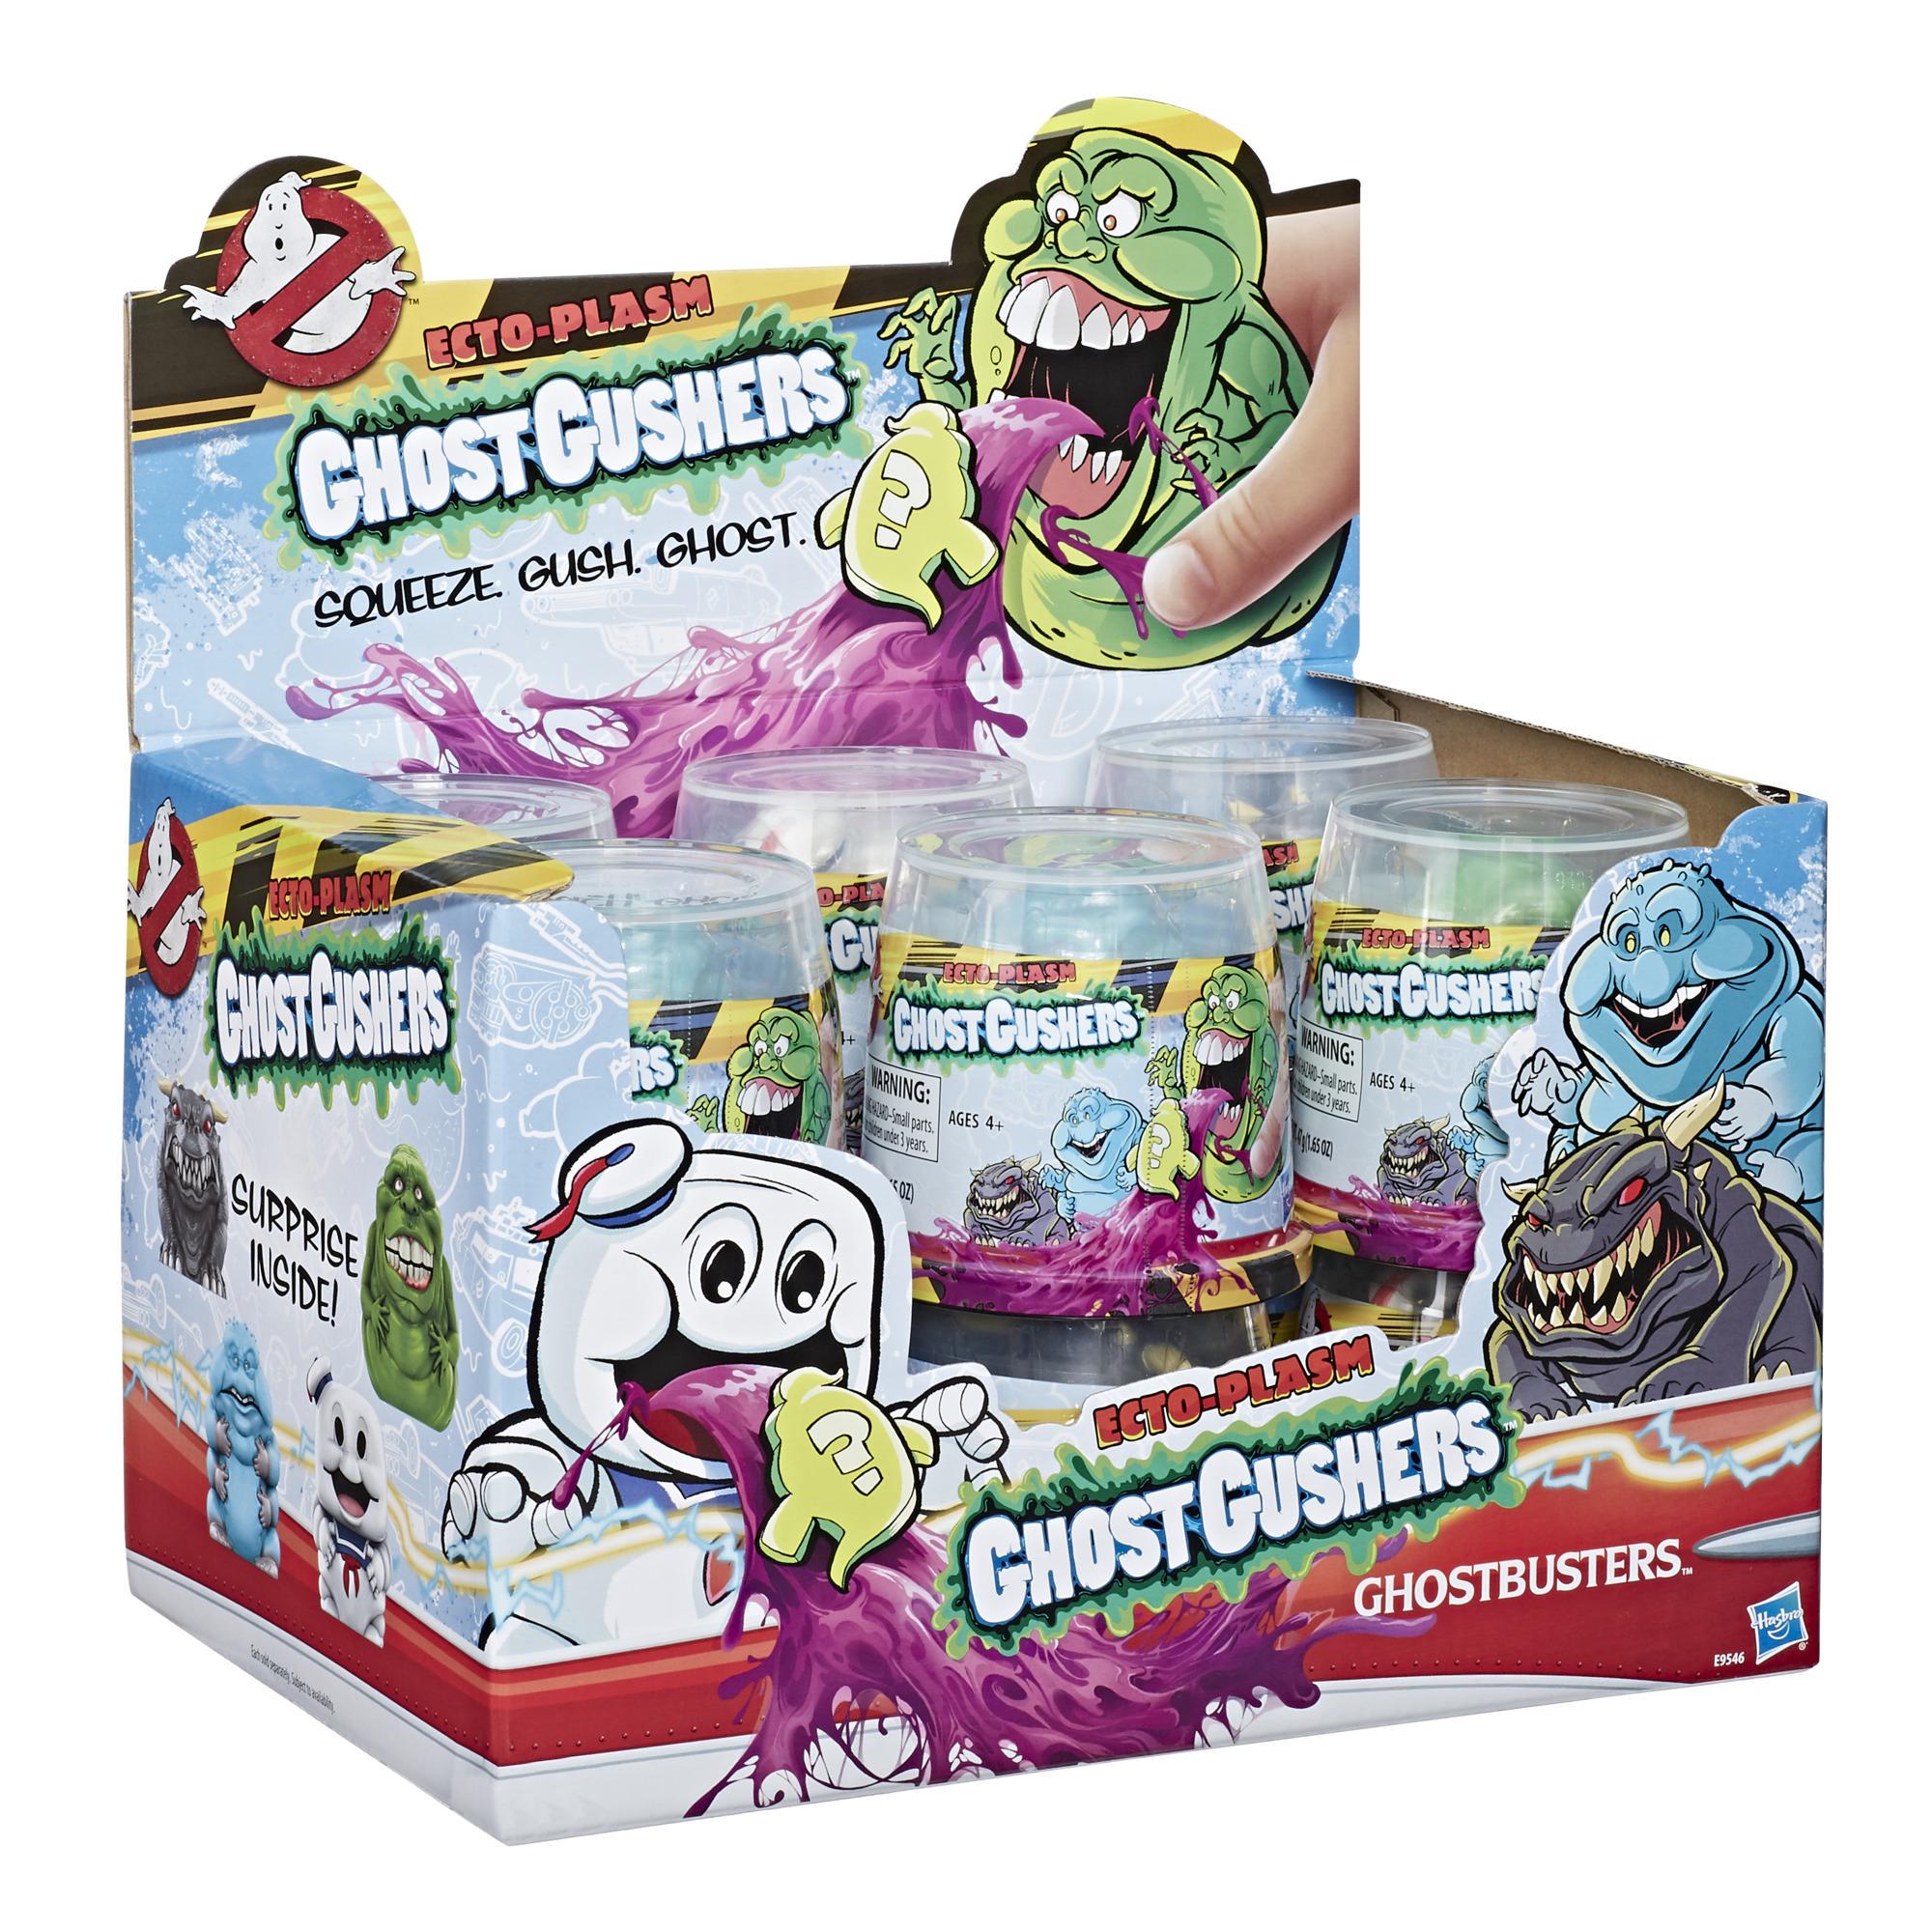 Ghostbusters Ecto-Plasm Ghost Gushers Squeezable Figures with Ecto-Plasm and Mystery Mini Figures Inside product thumbnail 1